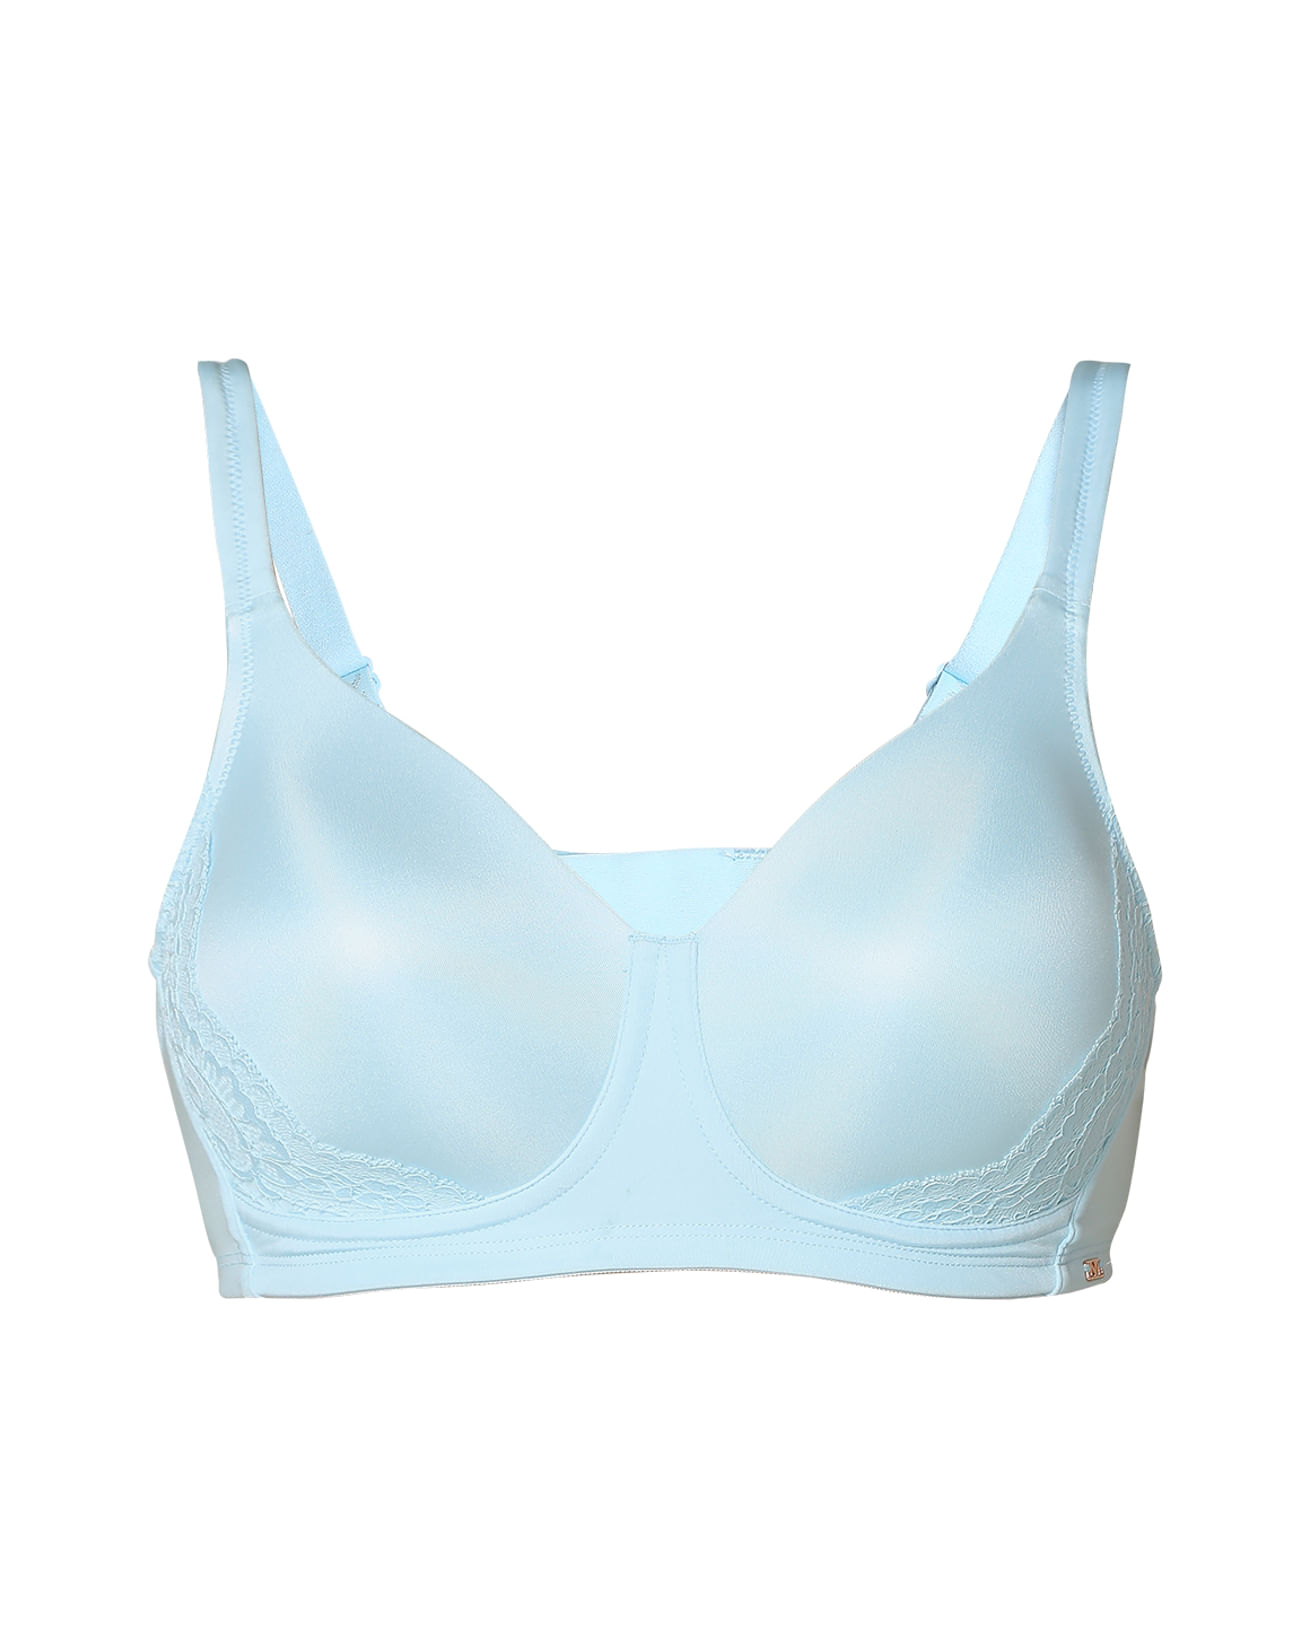 Villows Removable Padded Ribbon Bra - Lt Blue, Free at Rs 220